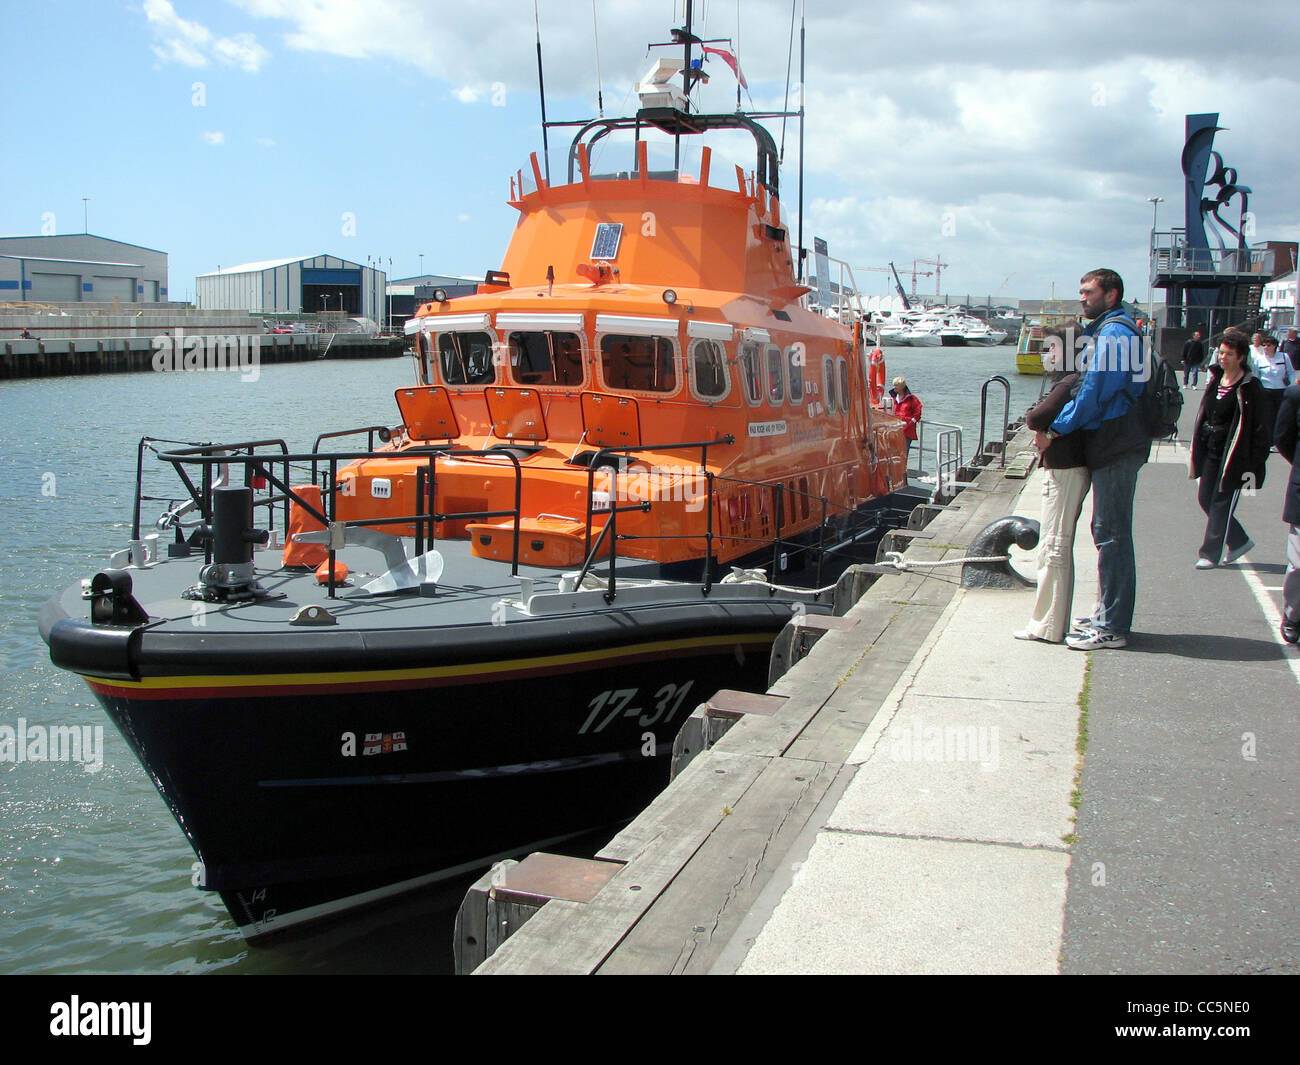 The bows of lifeboat 17-31 (Severn class) in Poole Harbour, Dorset, England. Stock Photo